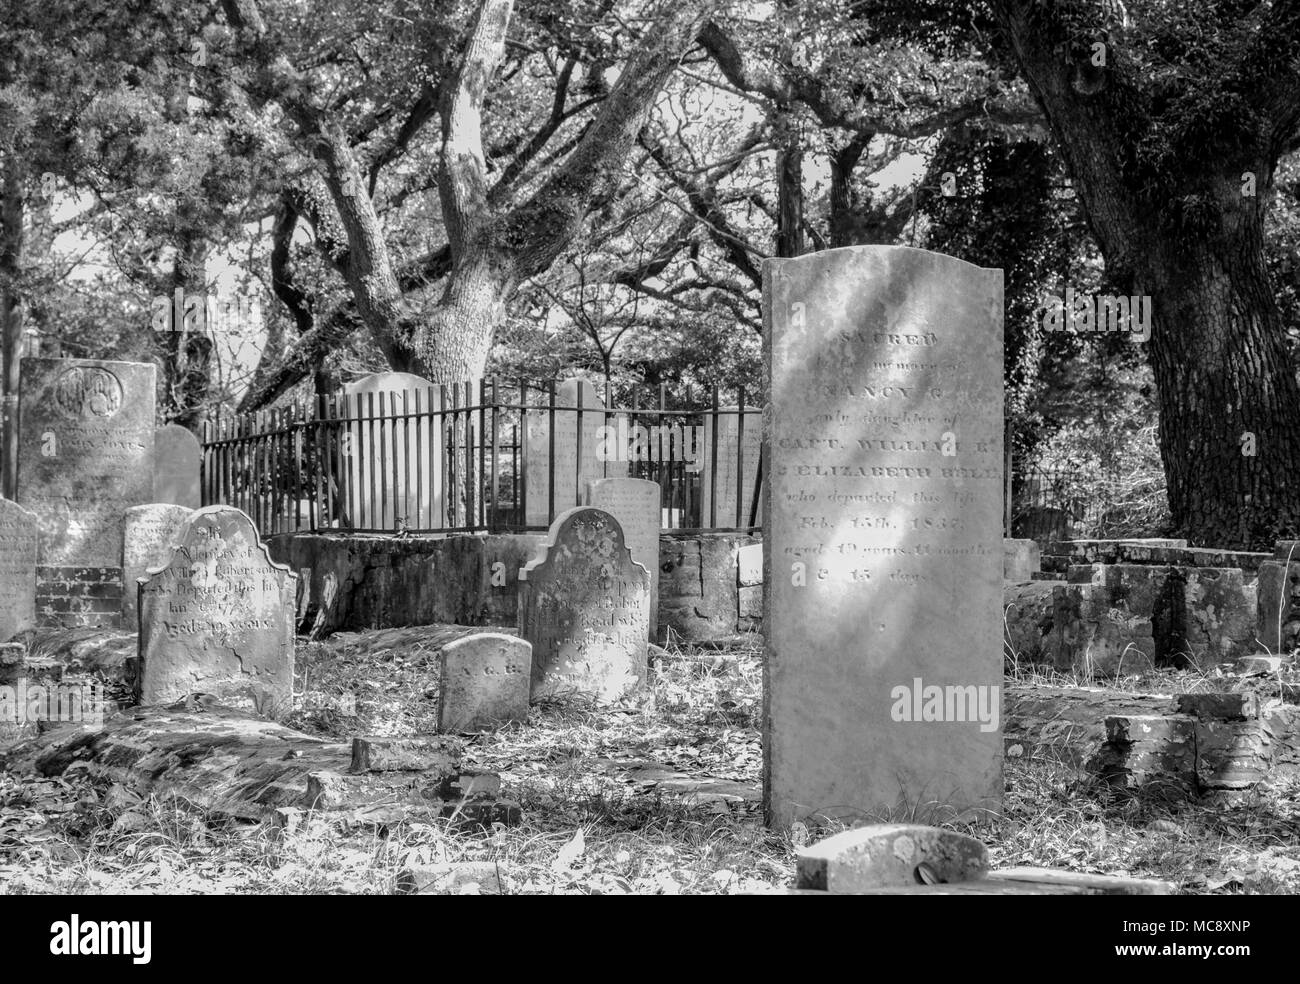 Headstones in the historic graveyard at Beaufort, North Carolina. Monochrome and color. Ghosts, goblins, and serenity all in one place! Stock Photo